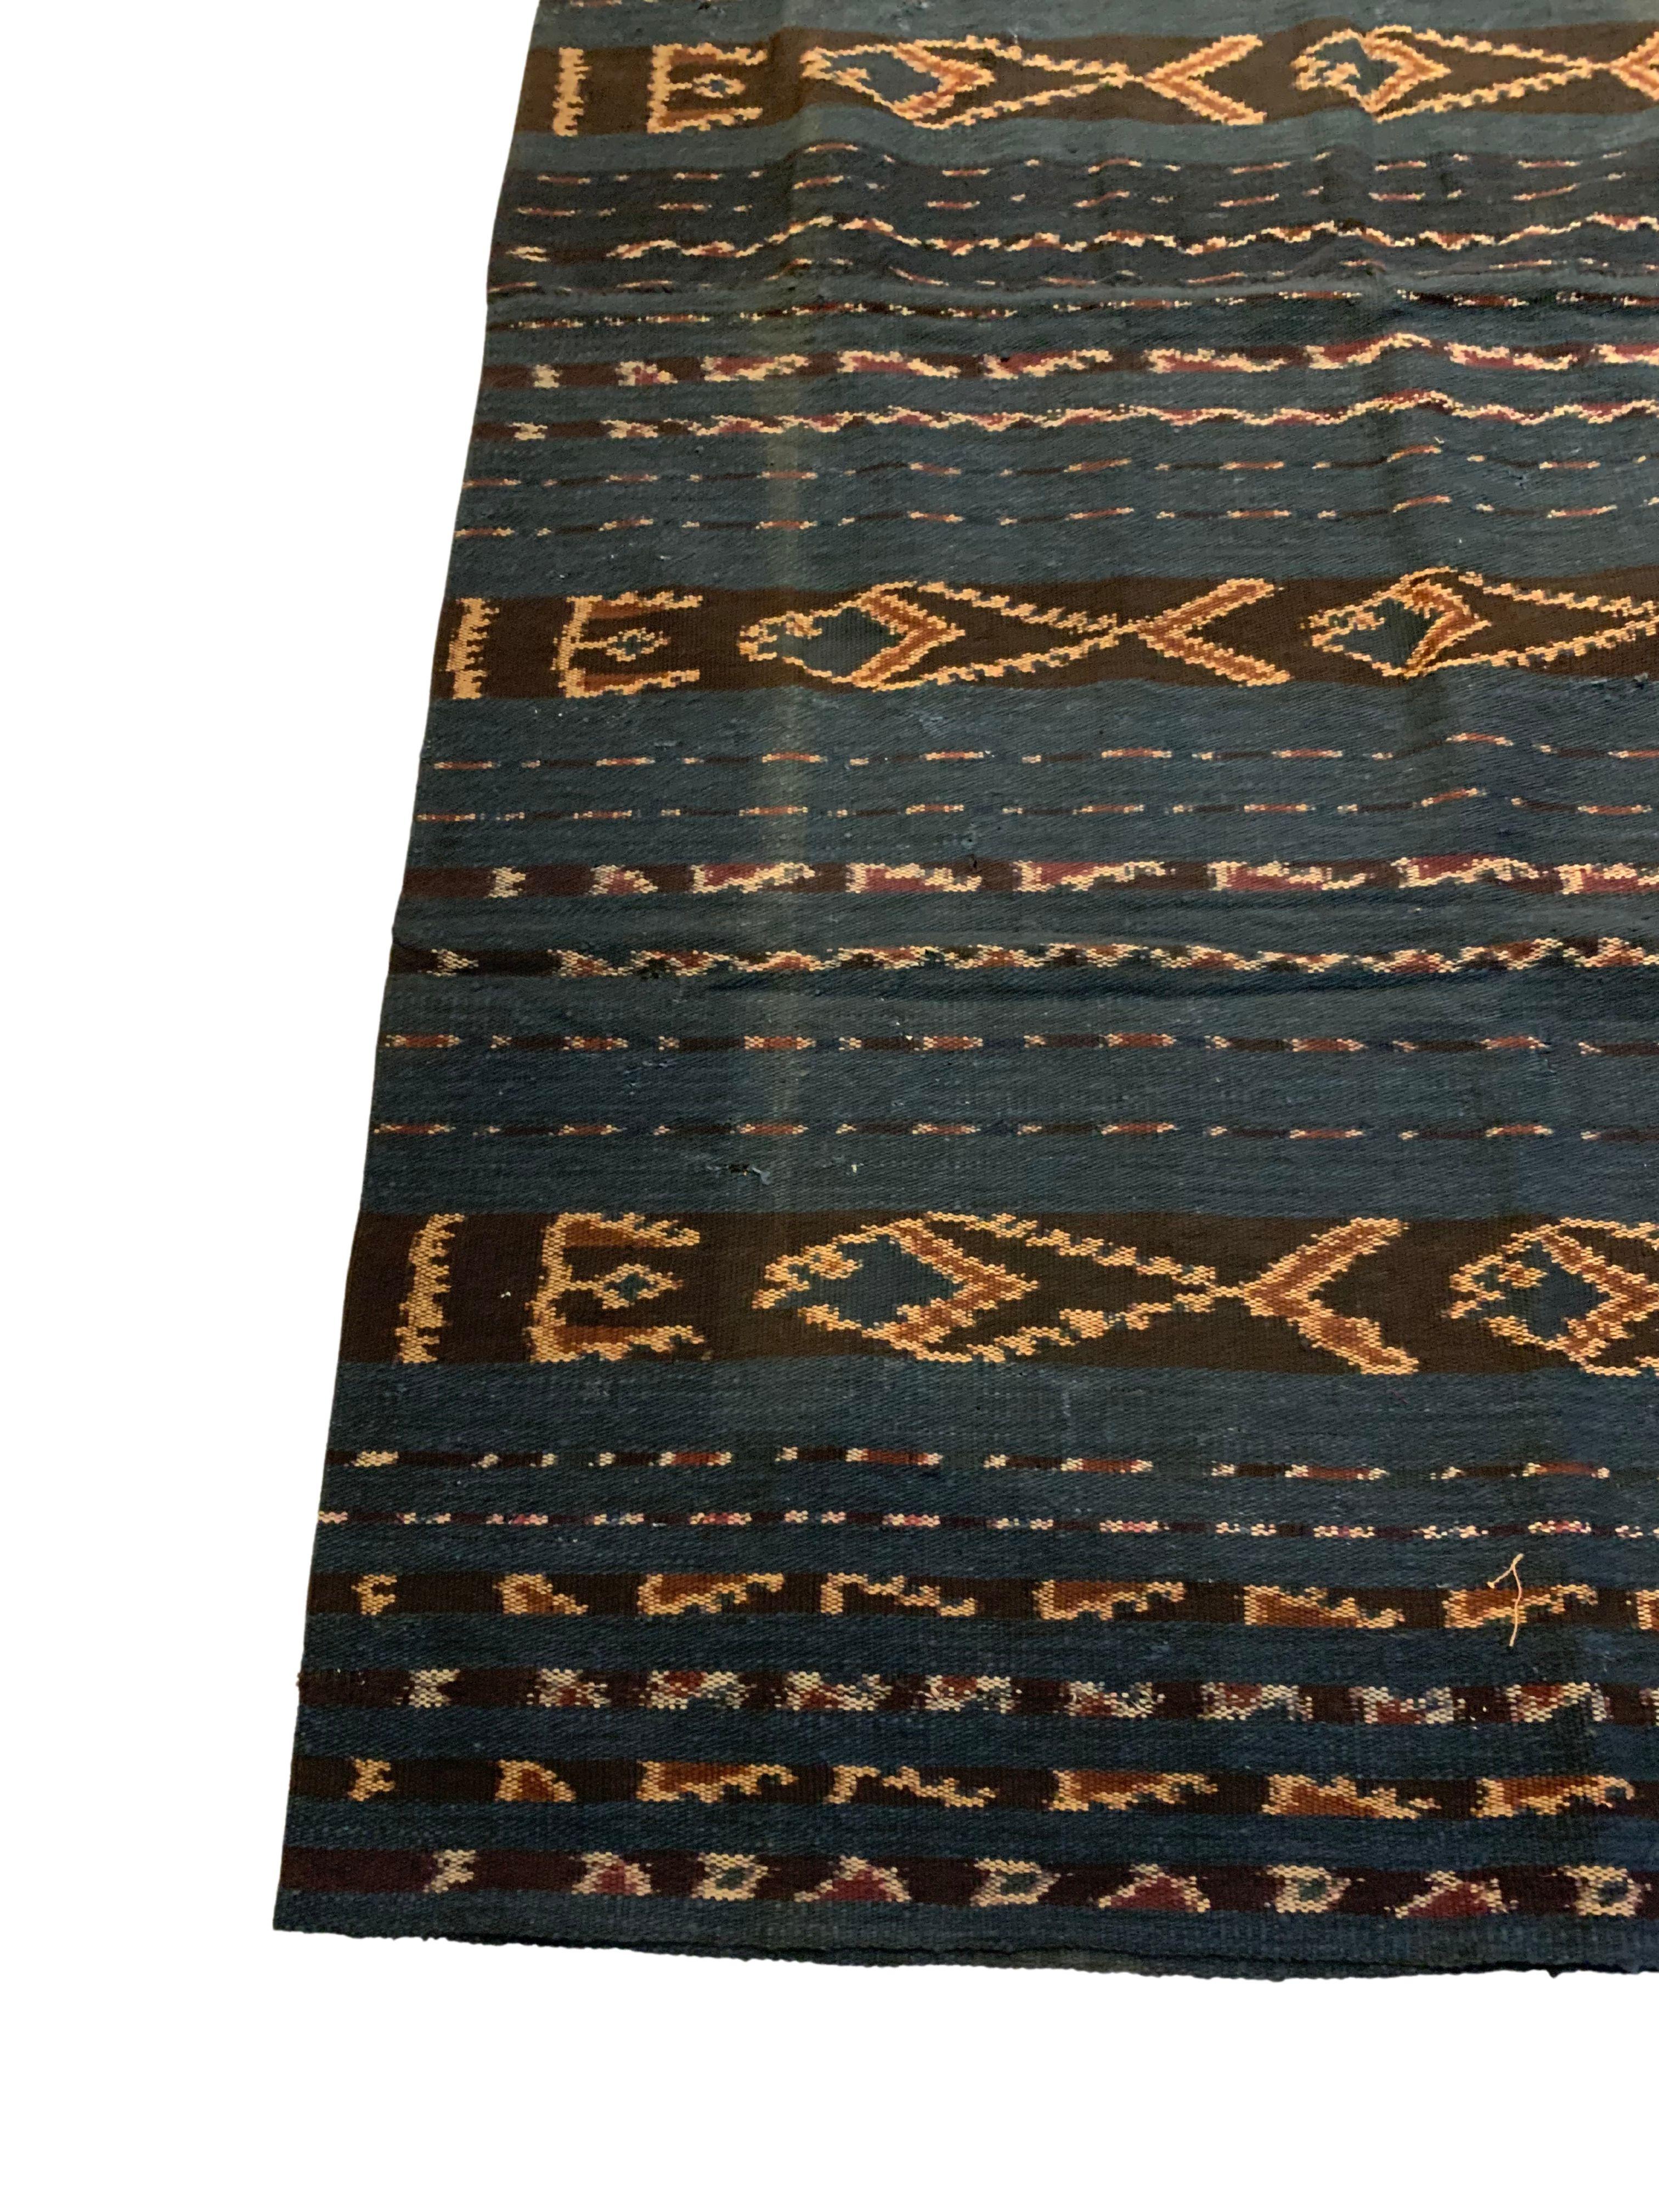 Other Ikat Textile from Maluku, Indonesia with Stunning Naturally Coloured Dye